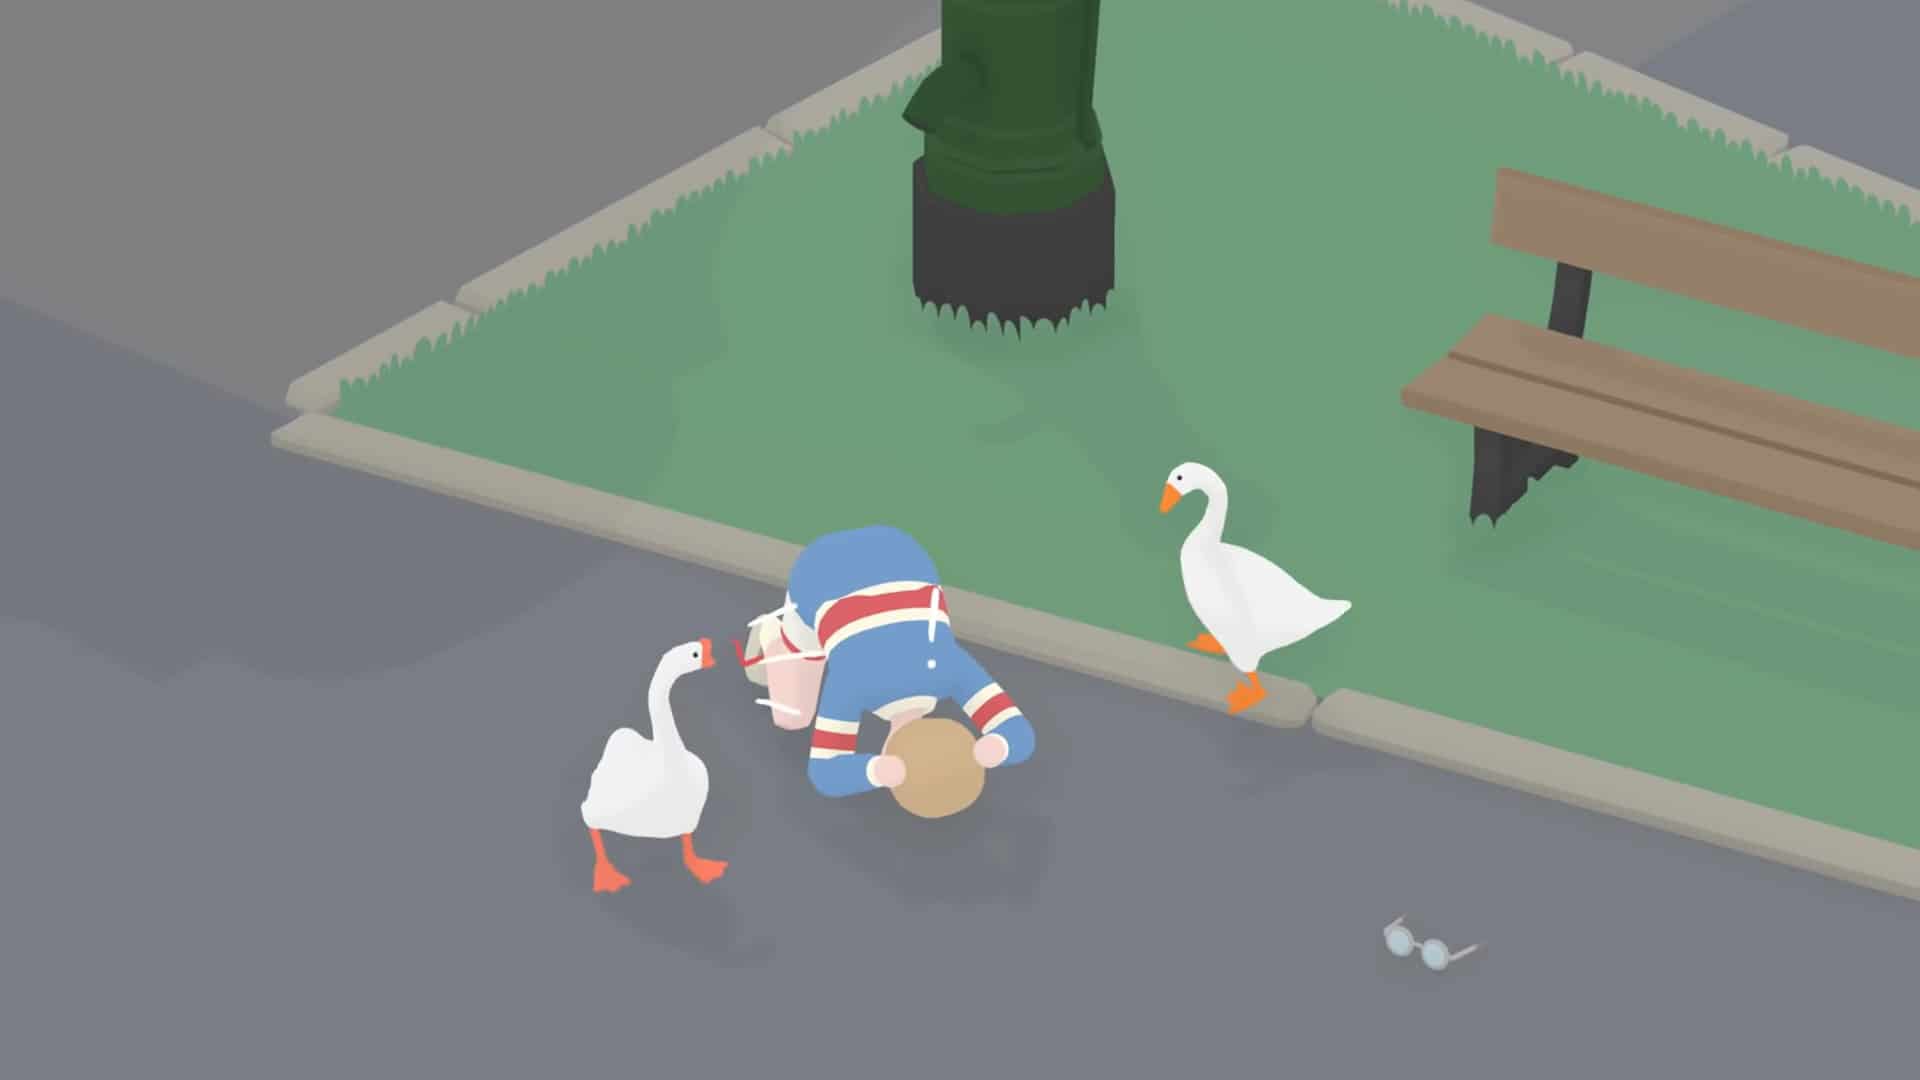 The world needs an Untitled Goose Game sequel – Reader's Feature